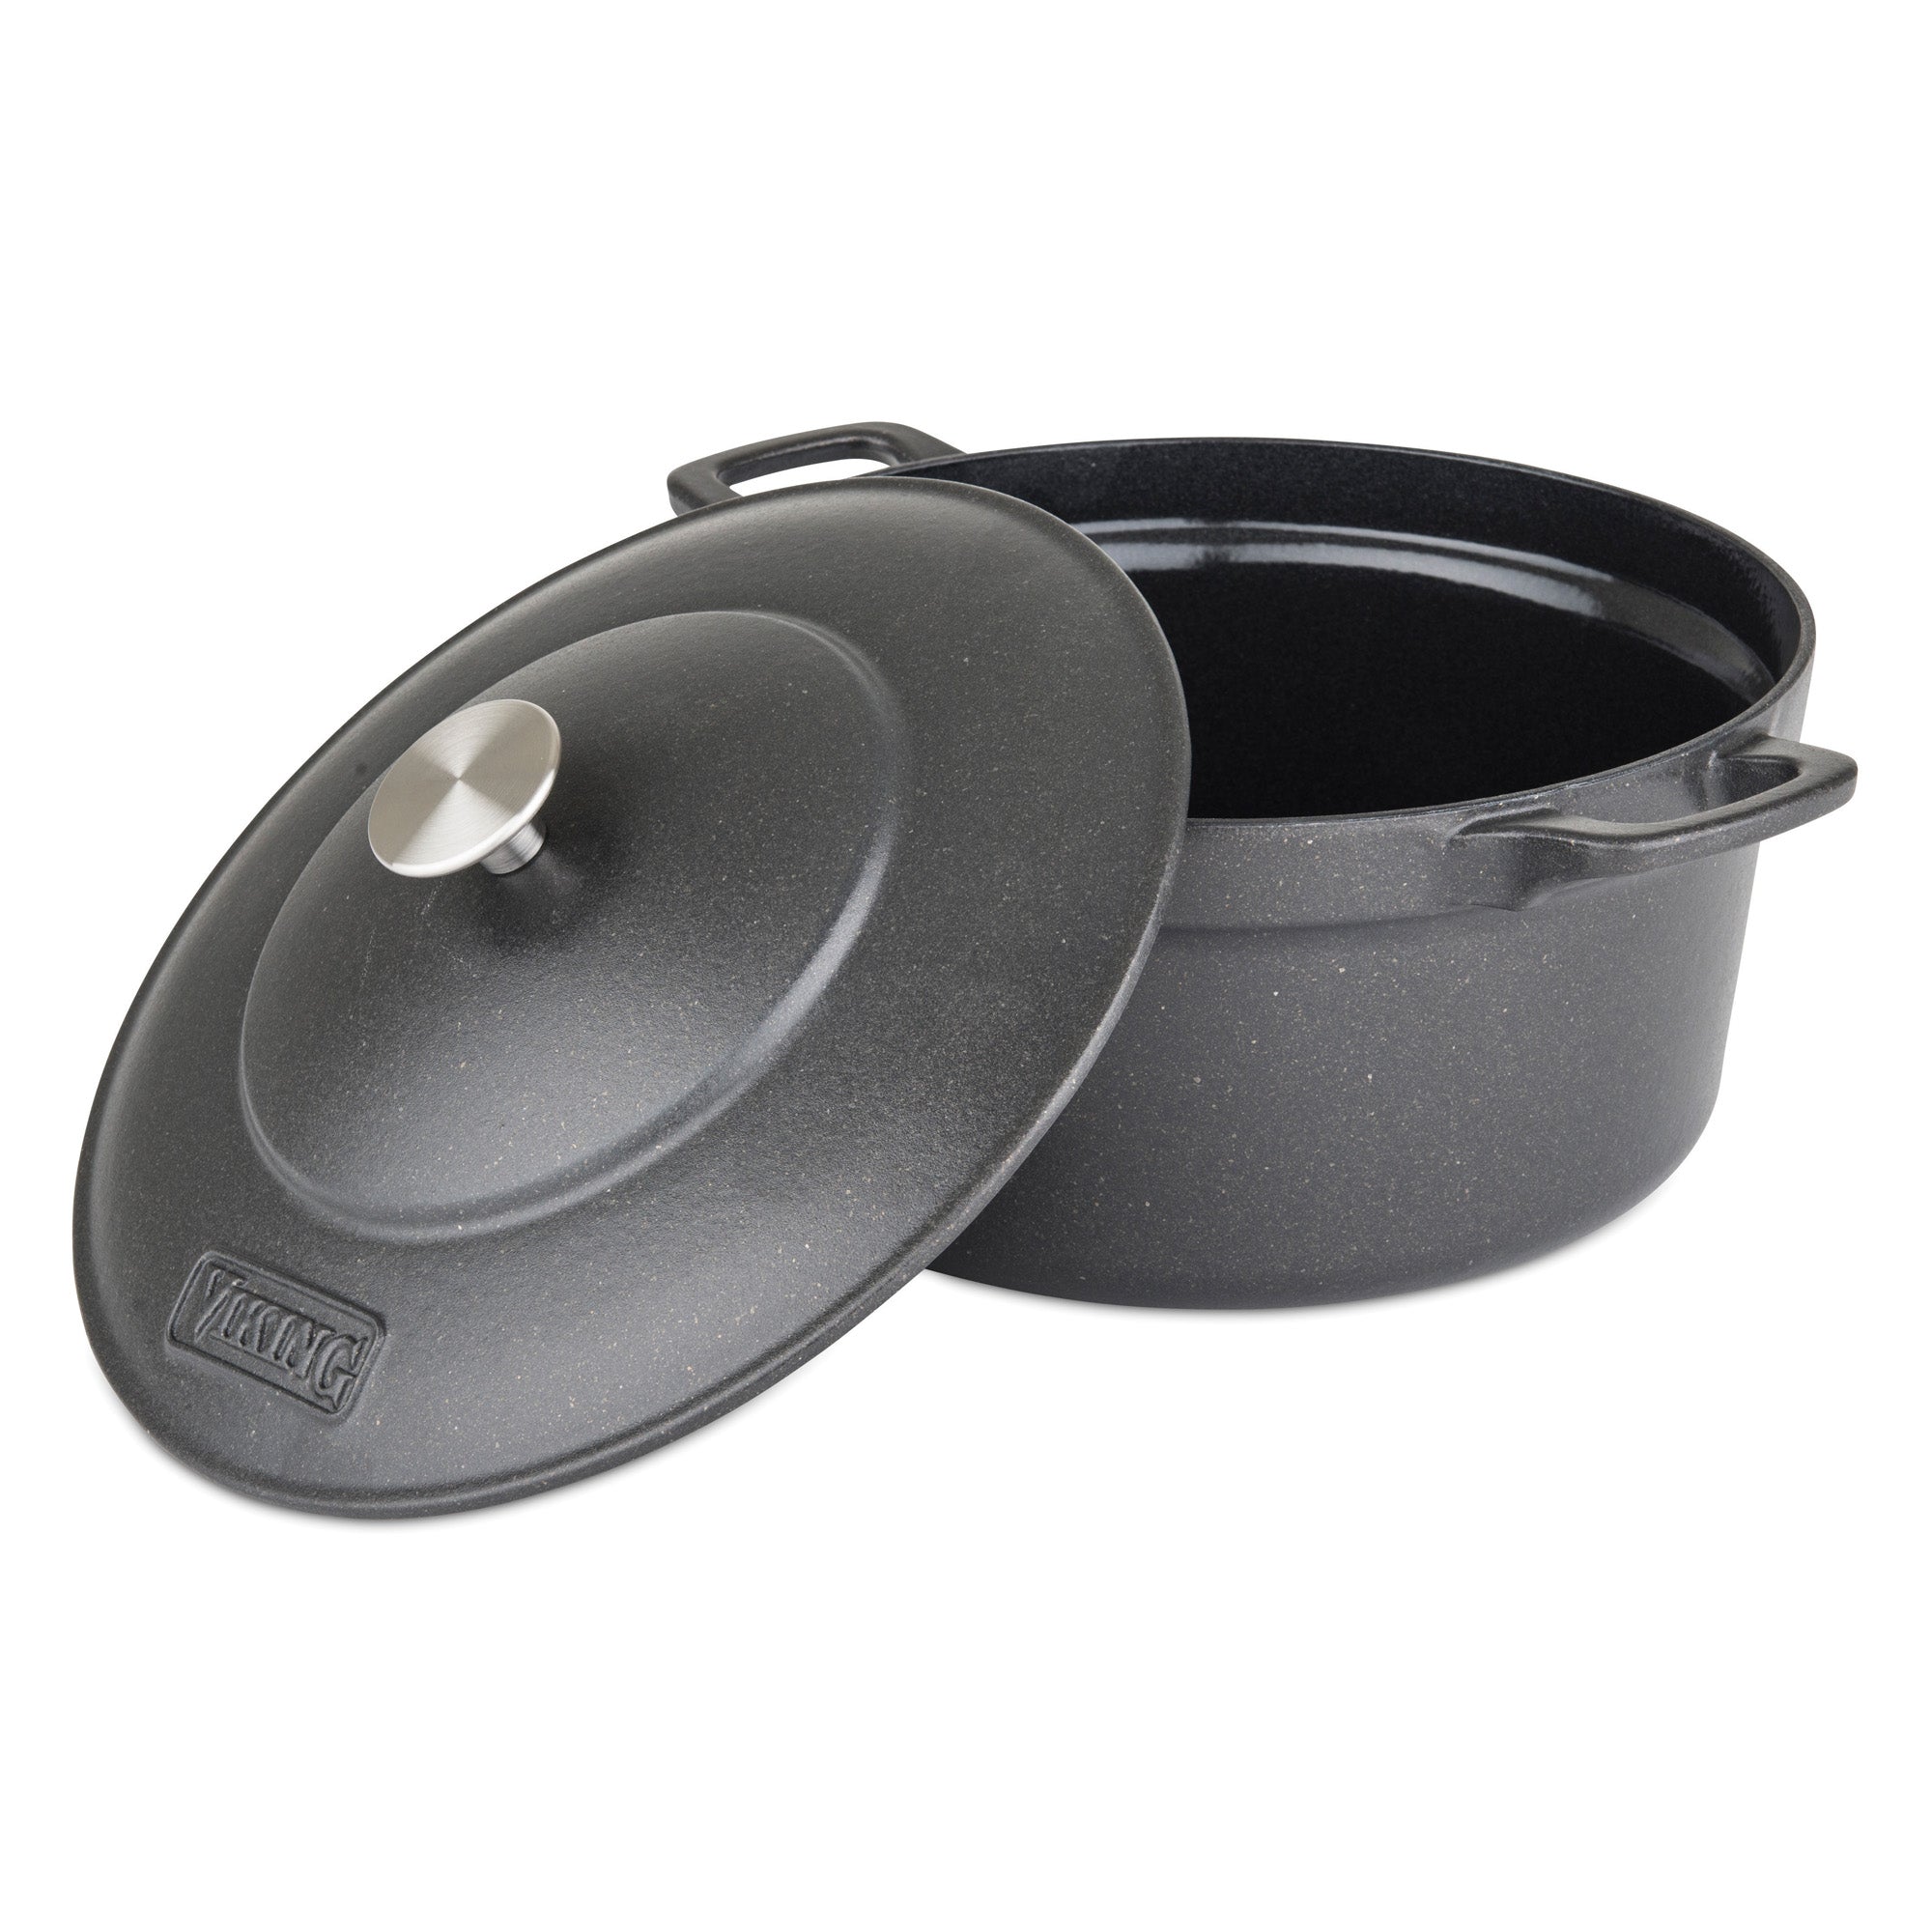 The 4-Quart and 7-Quart Enamel on Cast Iron Dutch Ovens, Cleans Easily,  Navy